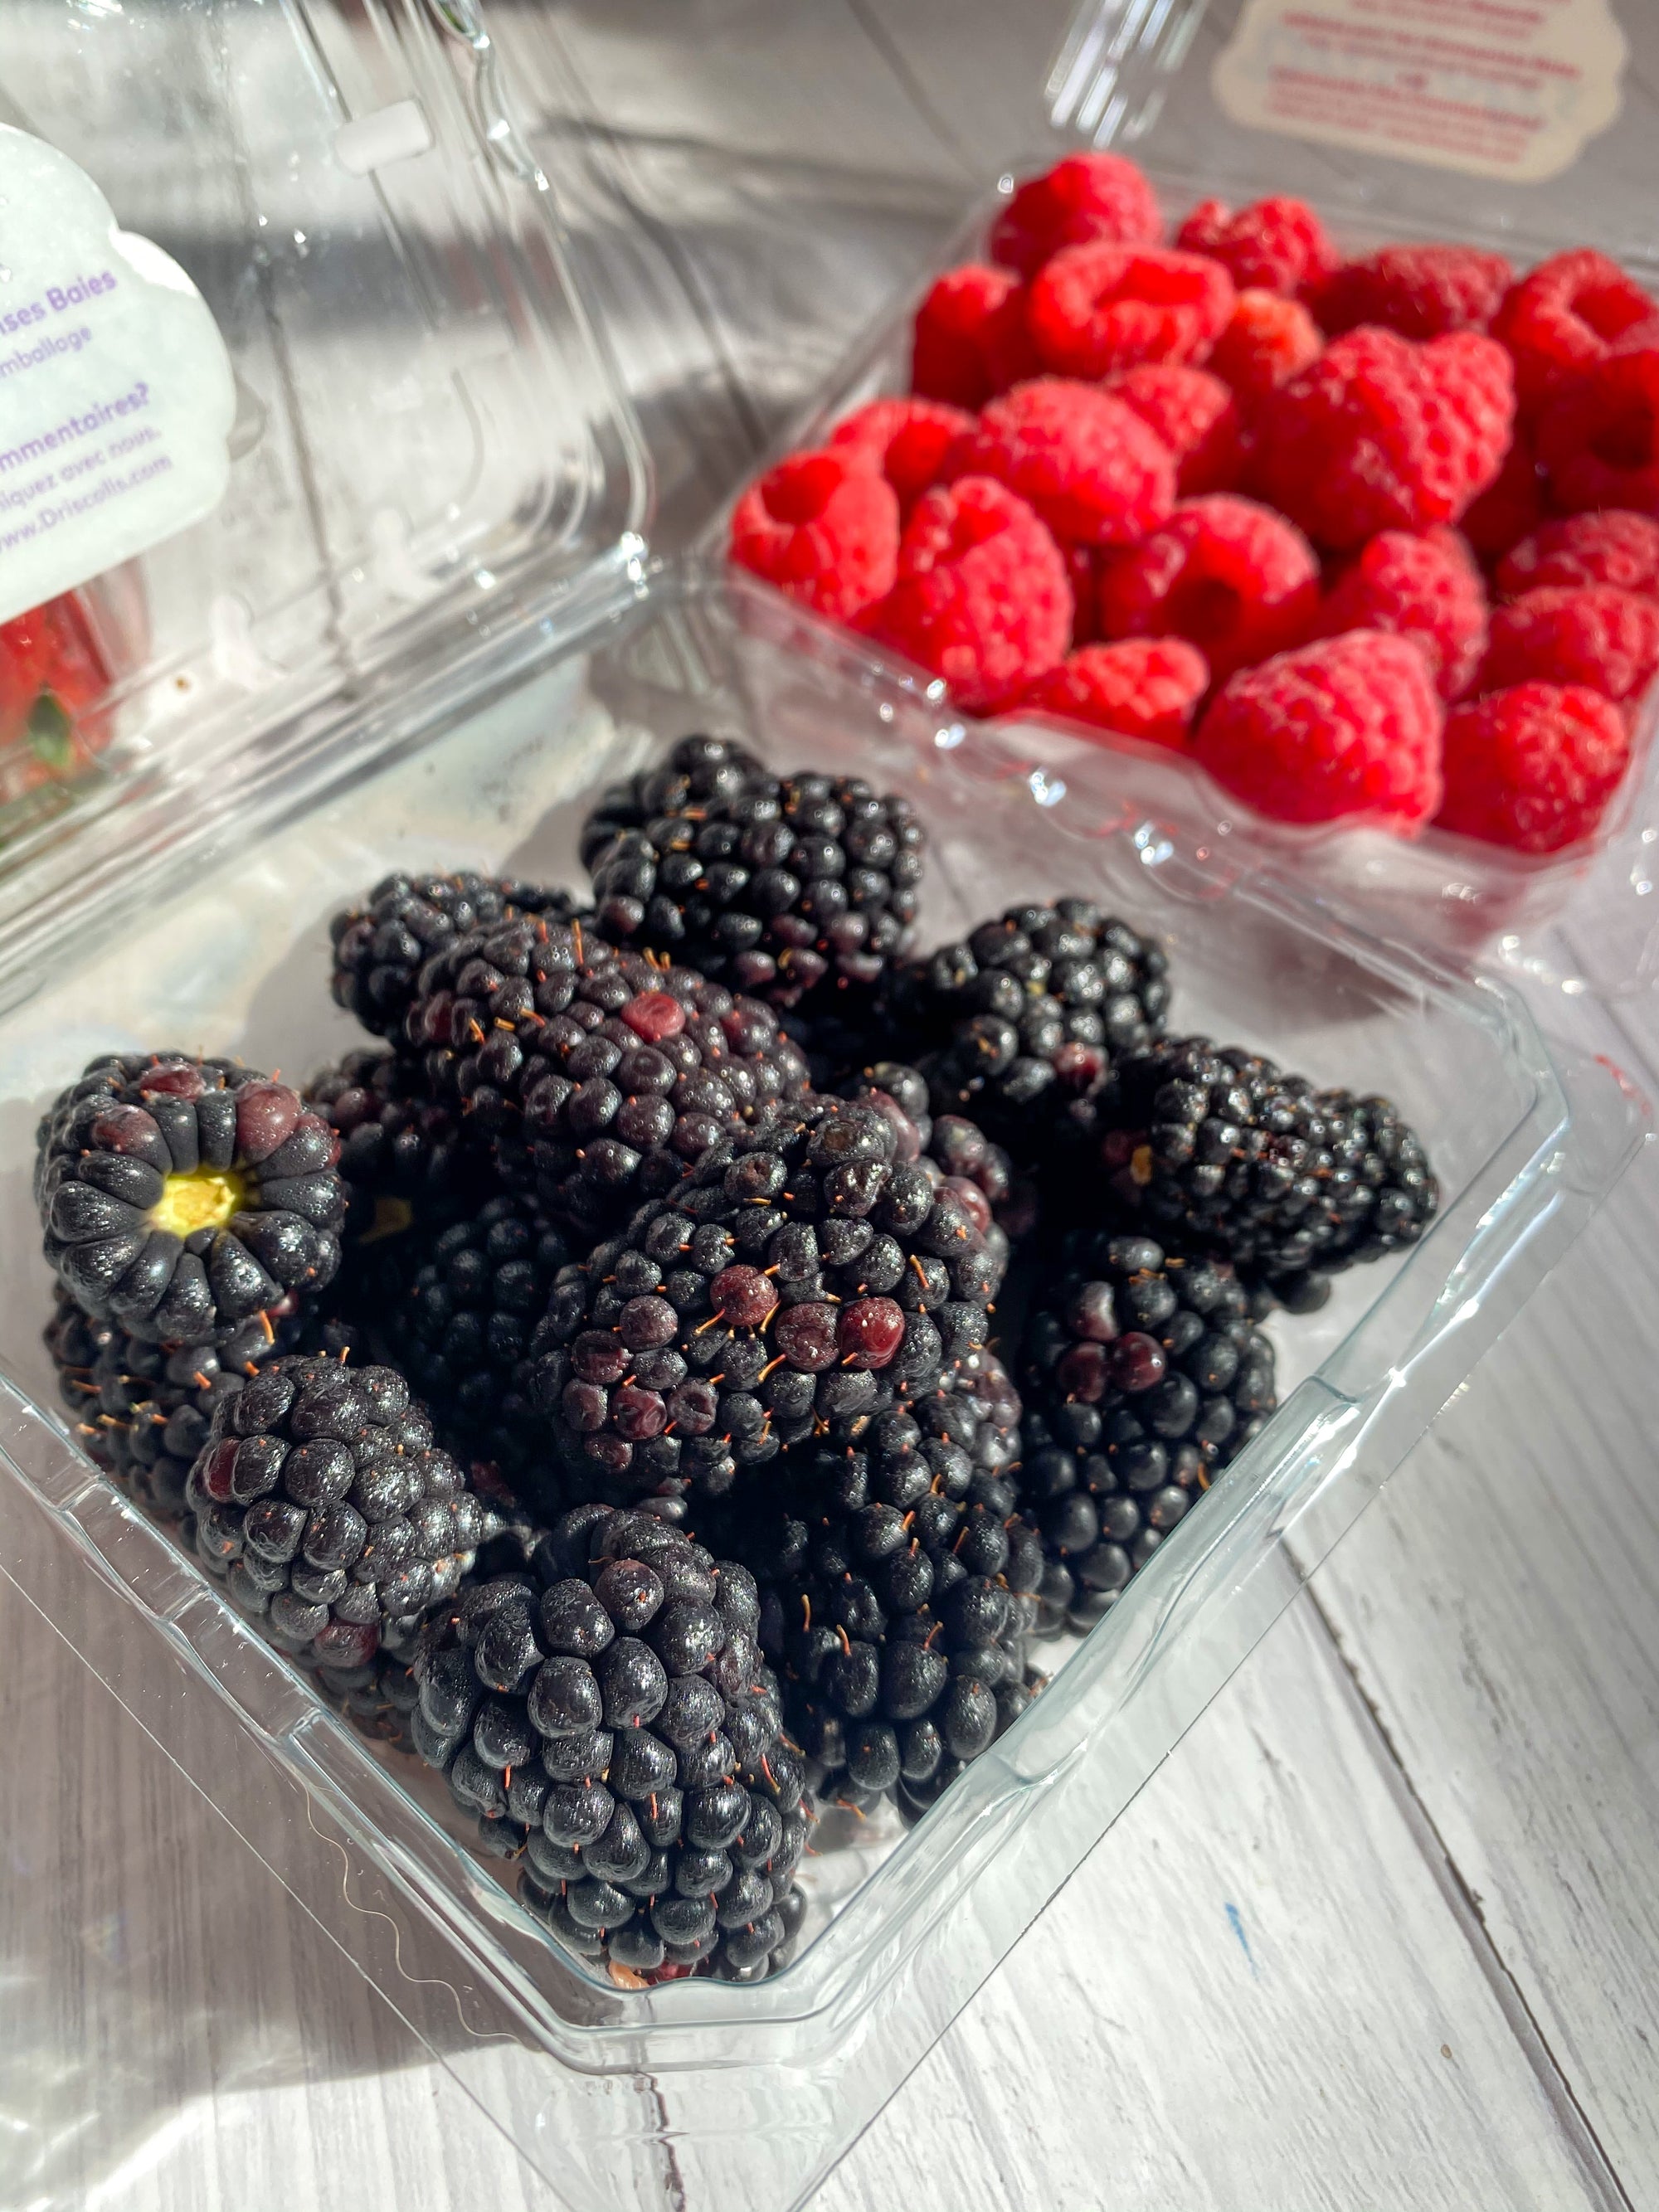 Buy 2 Driscoll's Blackberries for Php 1000